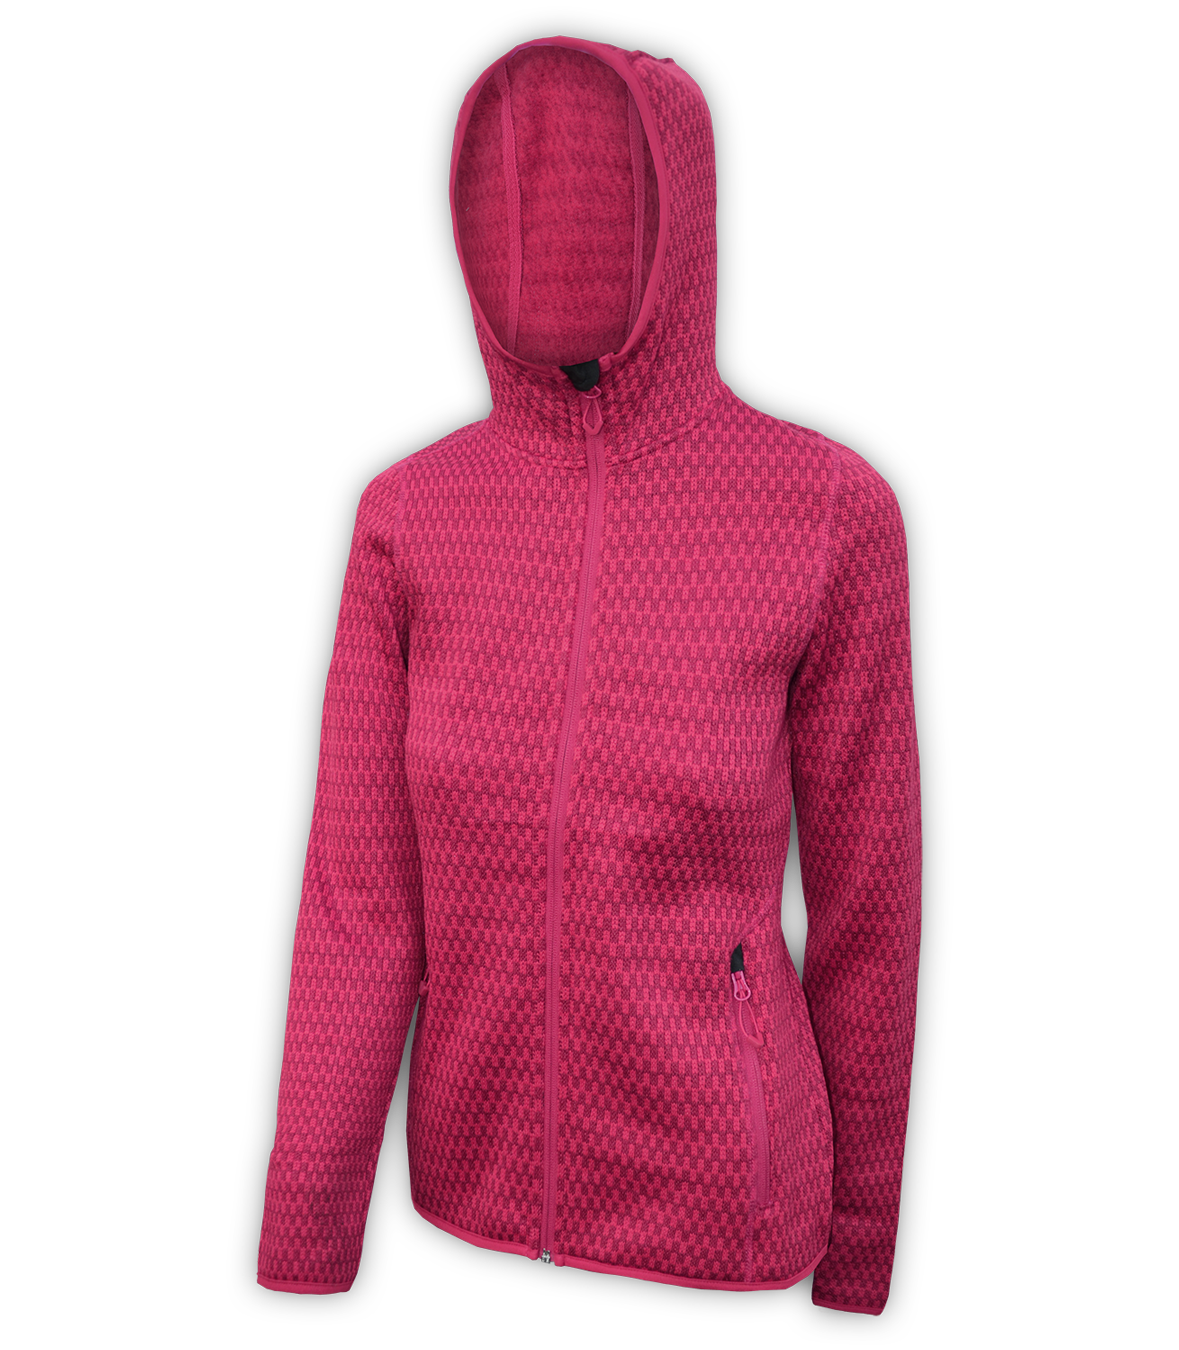 Renegade-club-womens-full-zip-fleece-jacket-north shore-checkered-fuchsia-pink-fitted-outdoor-jacket-soft-hood